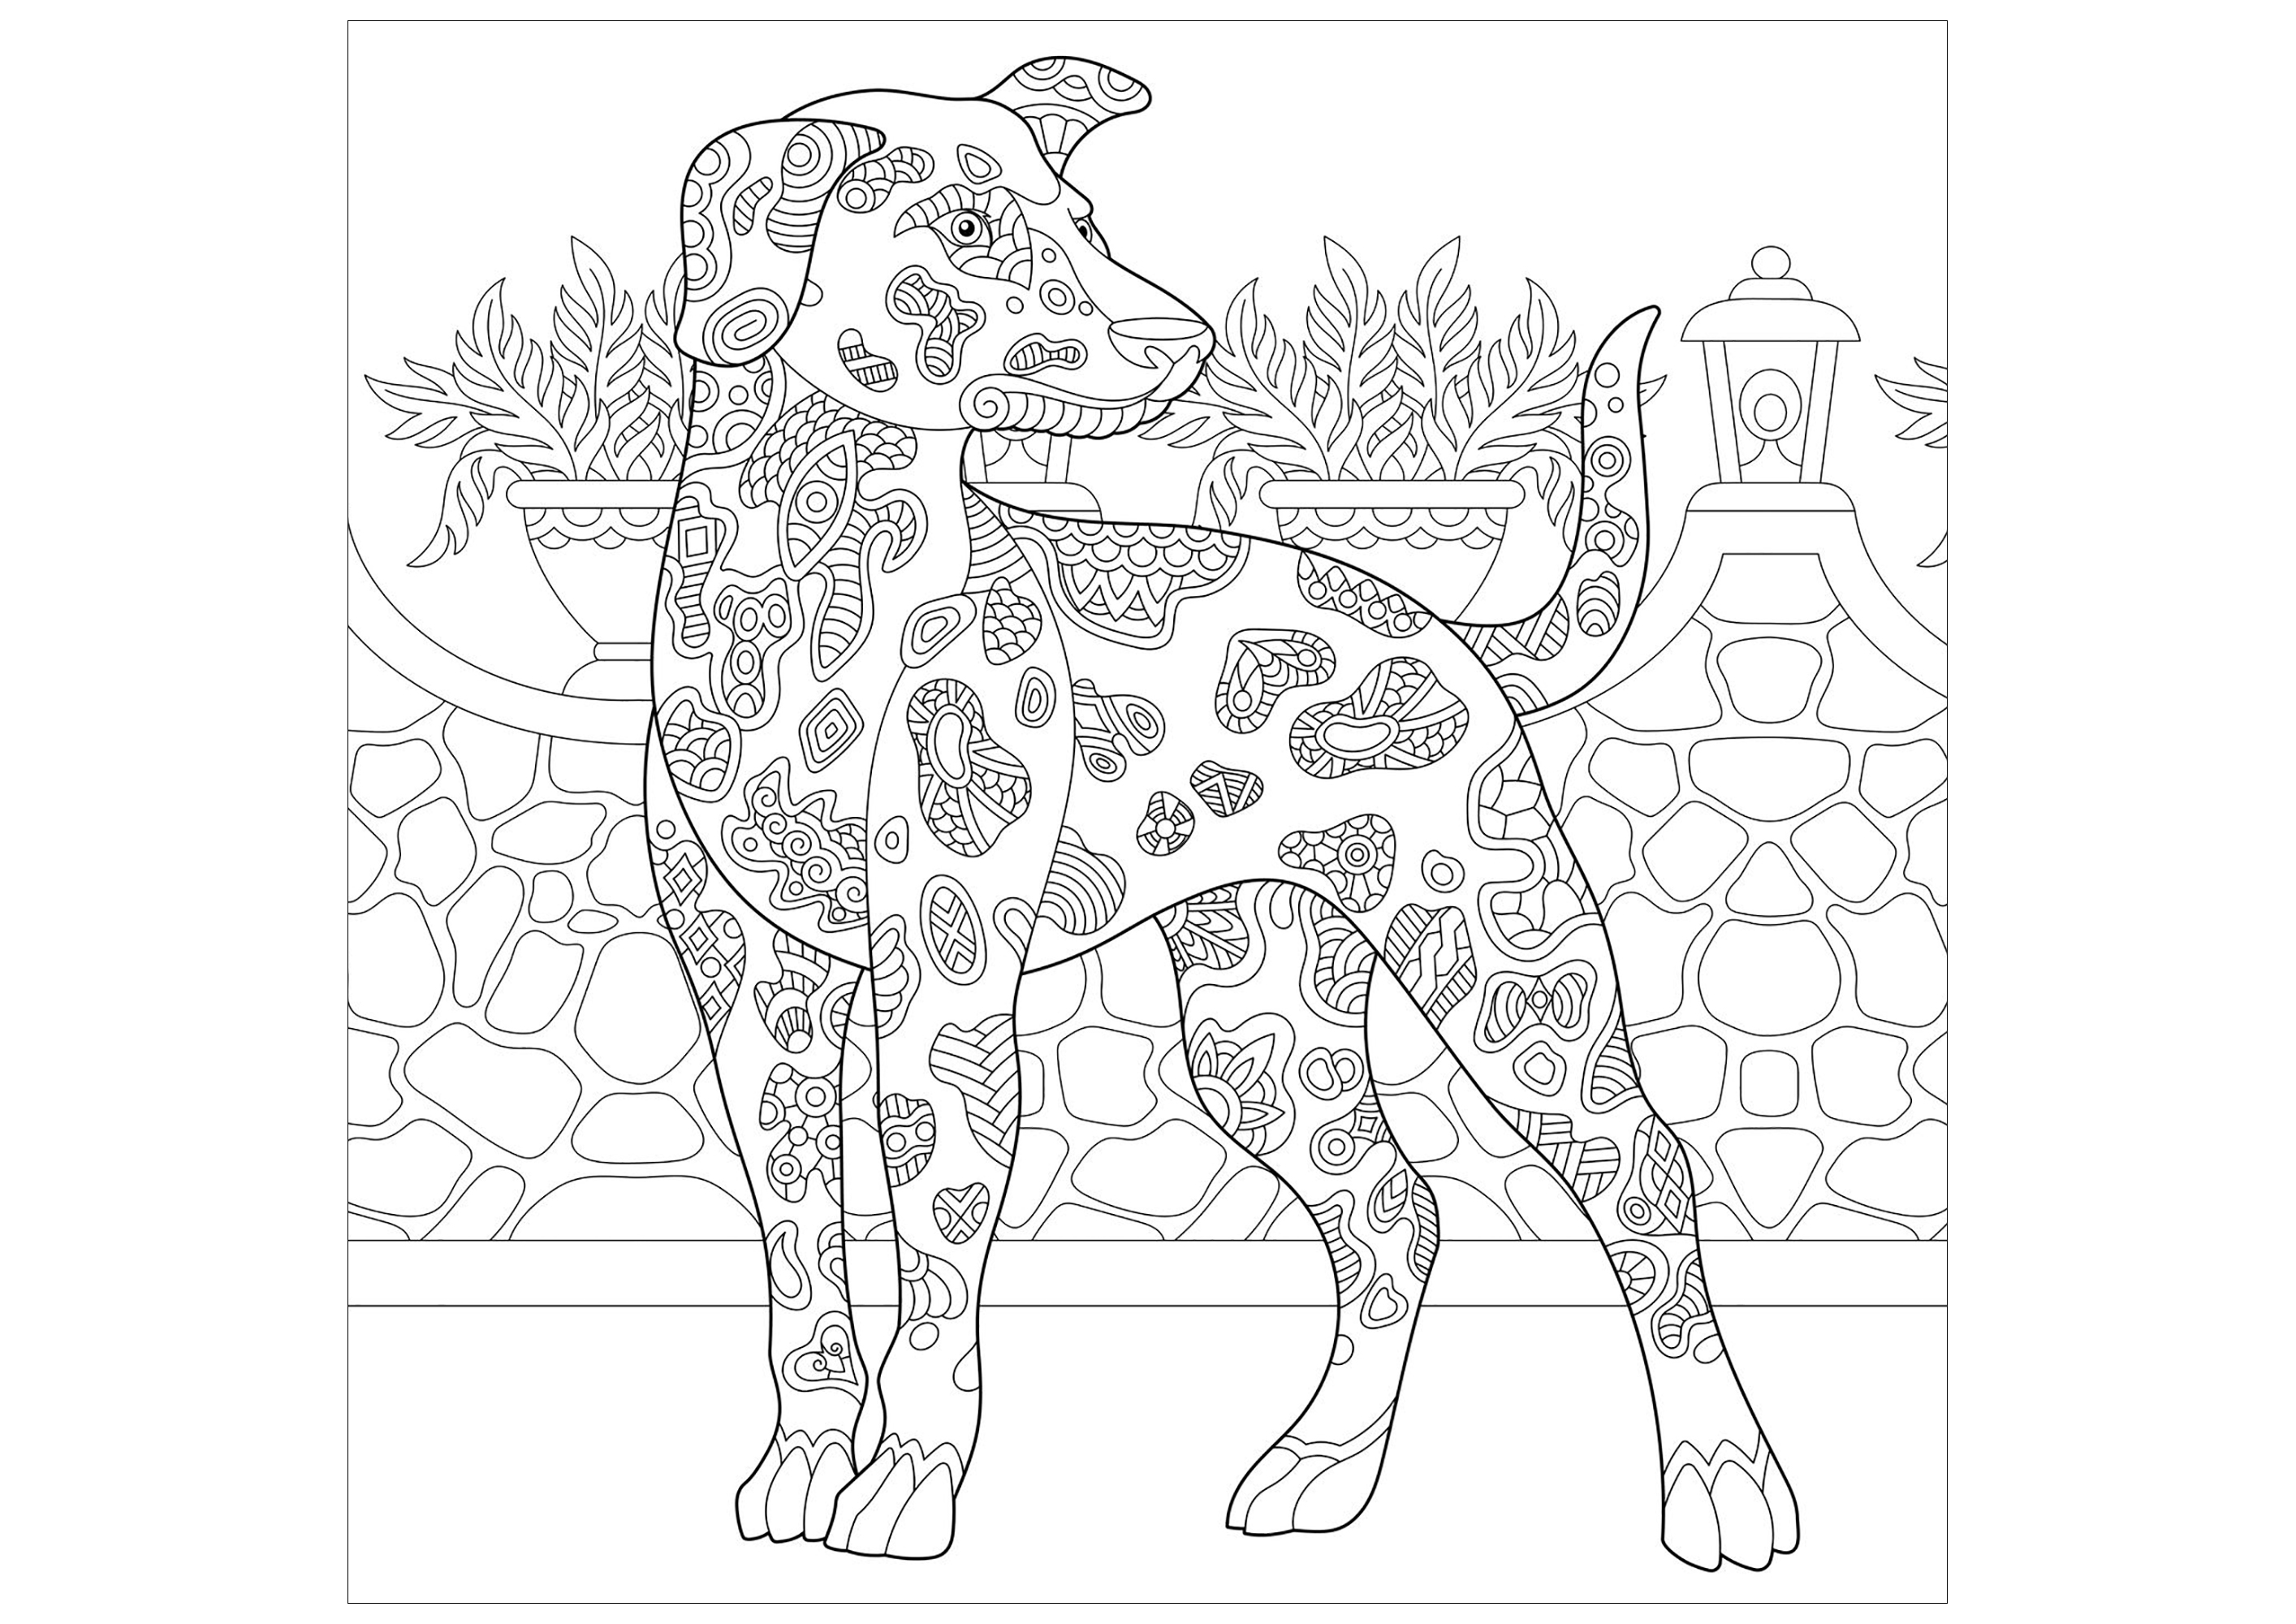 Funny Dogs coloring page for children